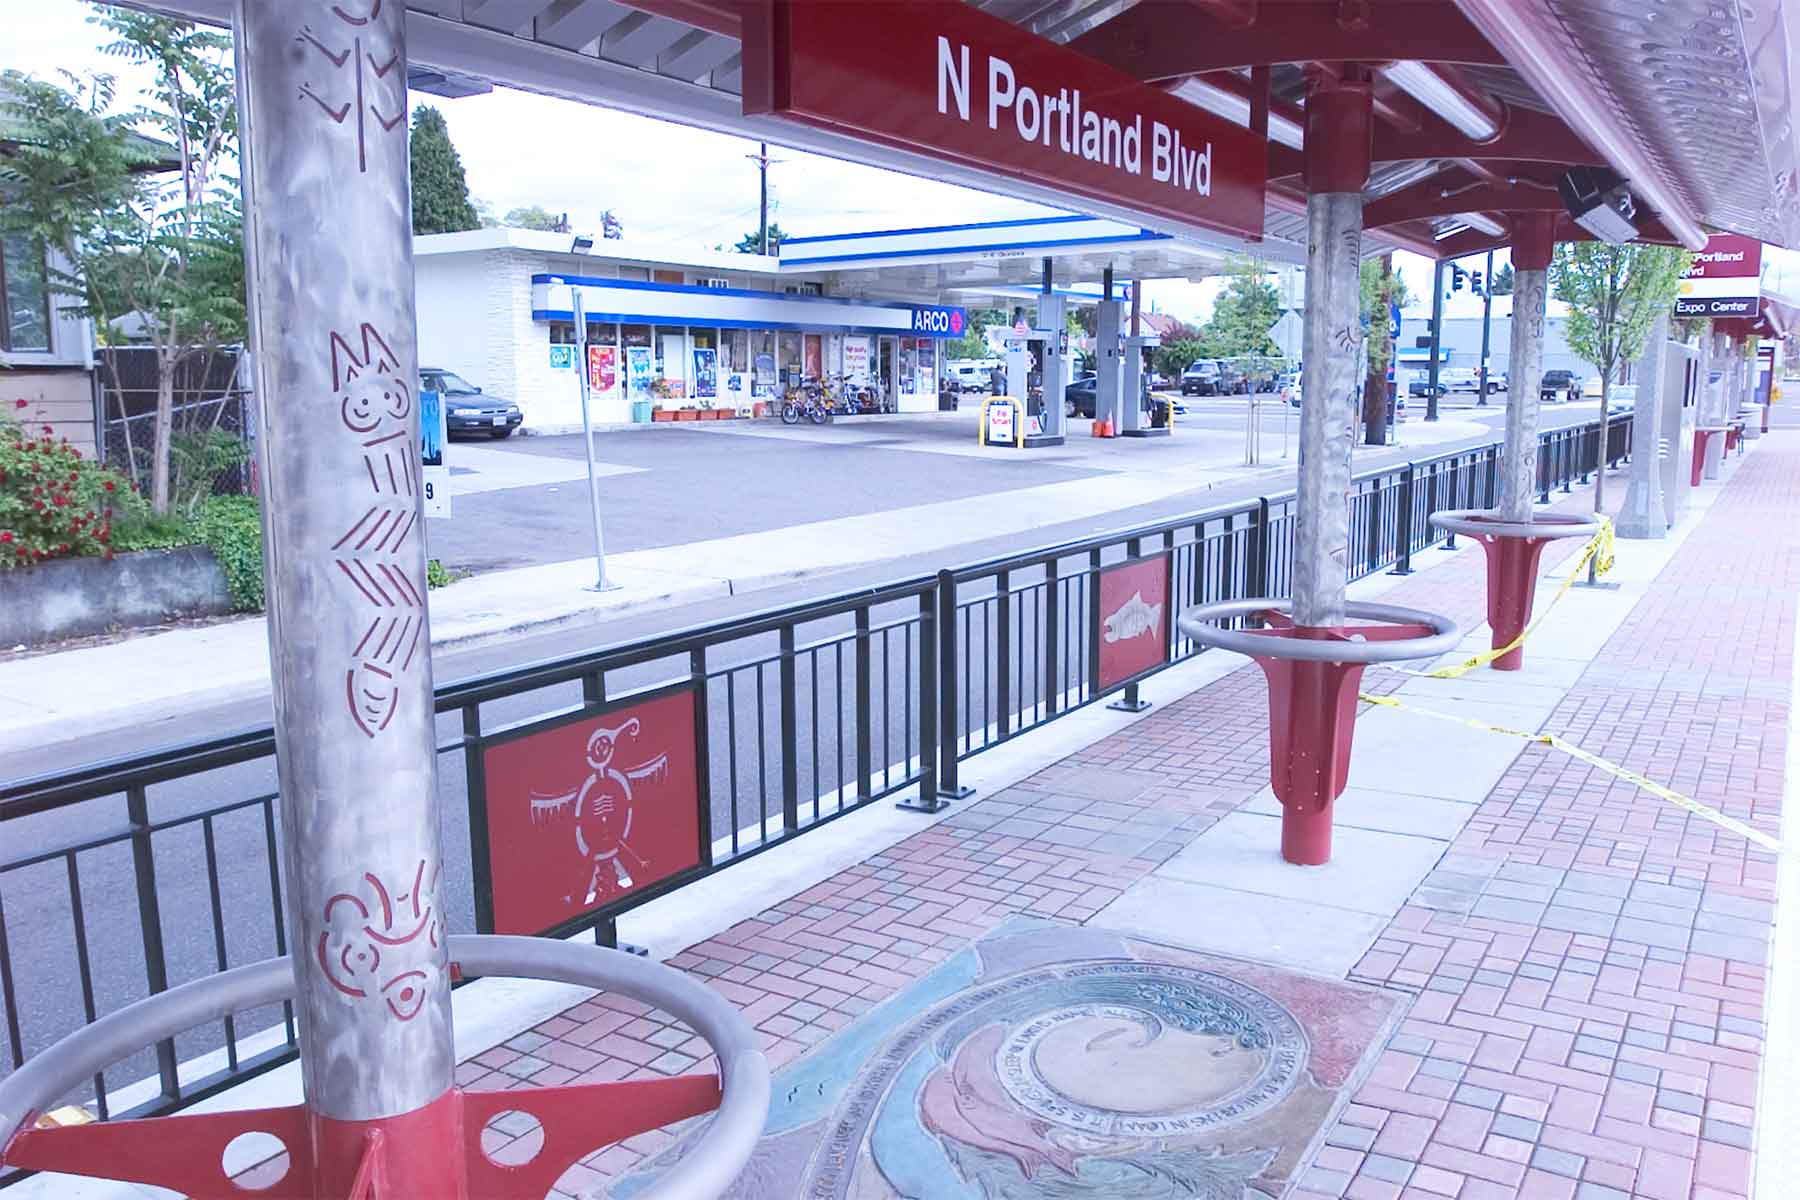 Trimet Light Rail Portland Blvd. Lillian Pitt was team leader of five Native American members to complete this station. I designed the bricks into a basket design, the fence railings, and the gable ends.